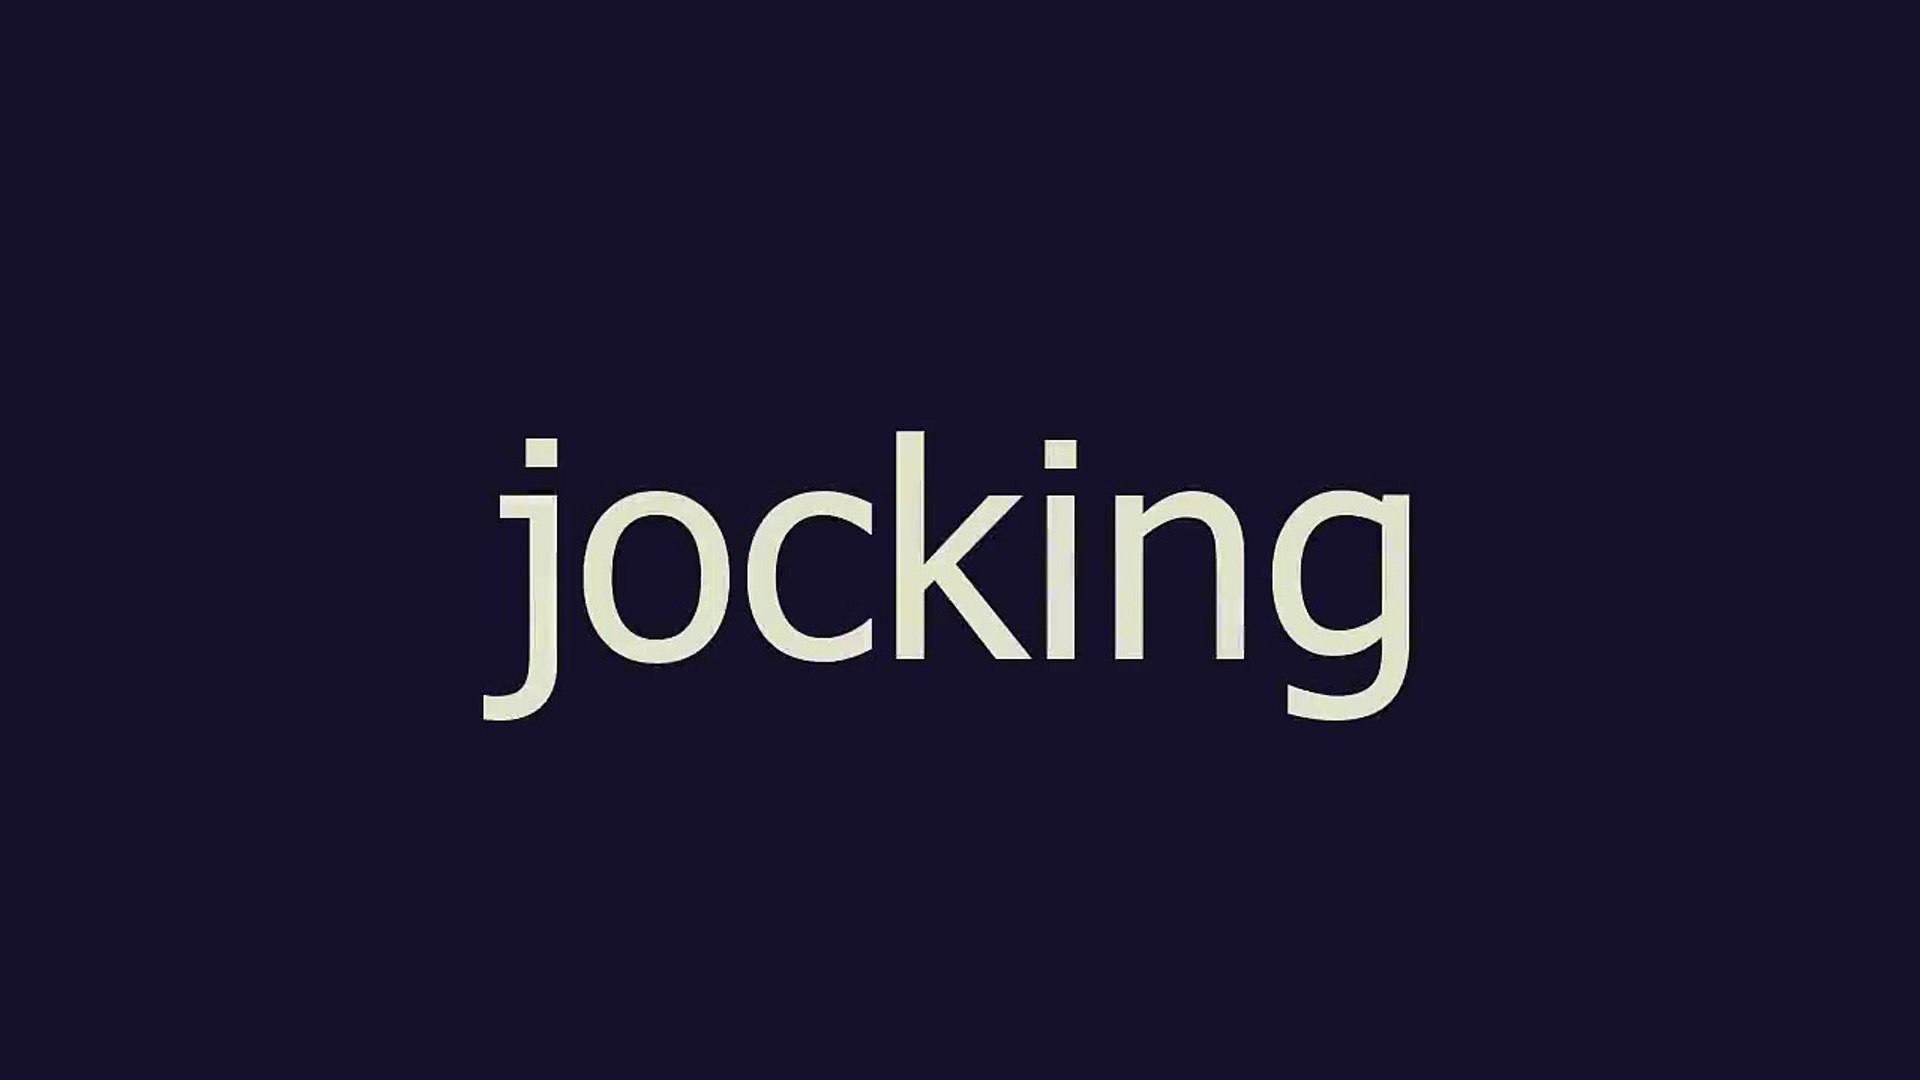 jocking meaning and pronunciation - video Dailymotion